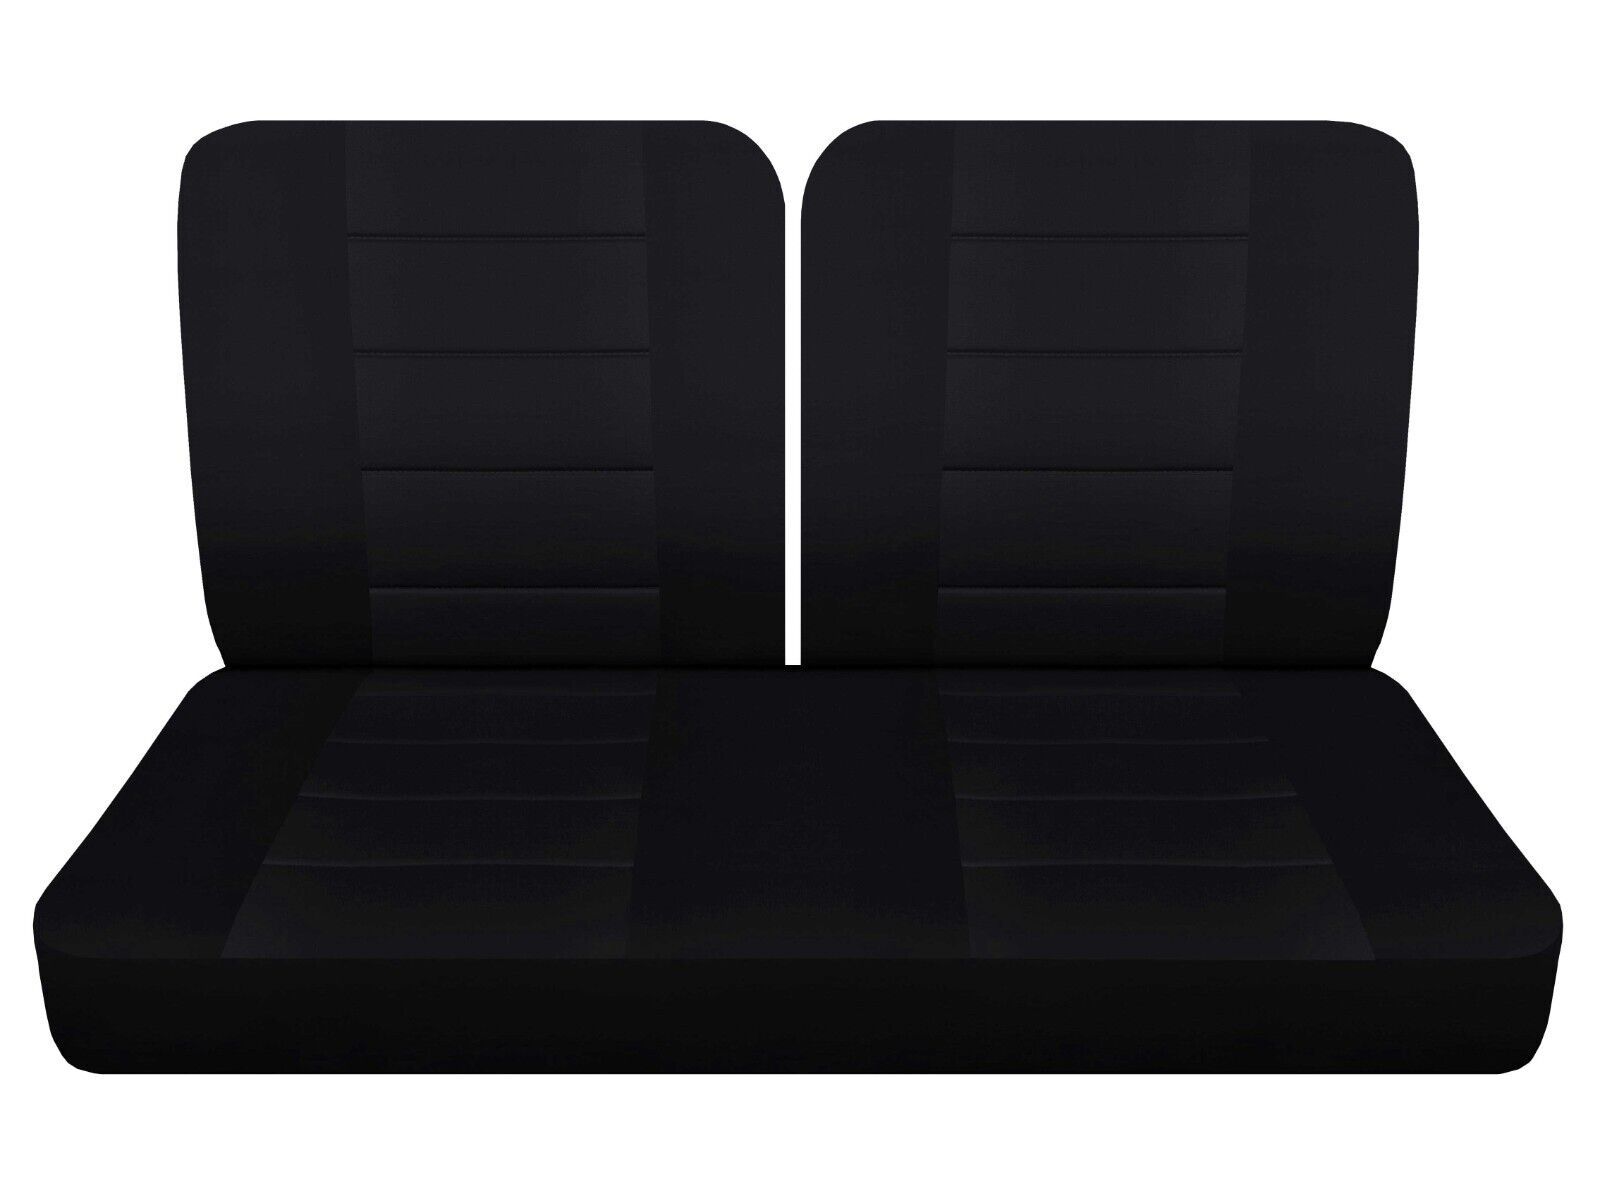 Primary image for Fits 1959 Chevy El Camino 2 door Black seat covers 50/50 top and solid bottom